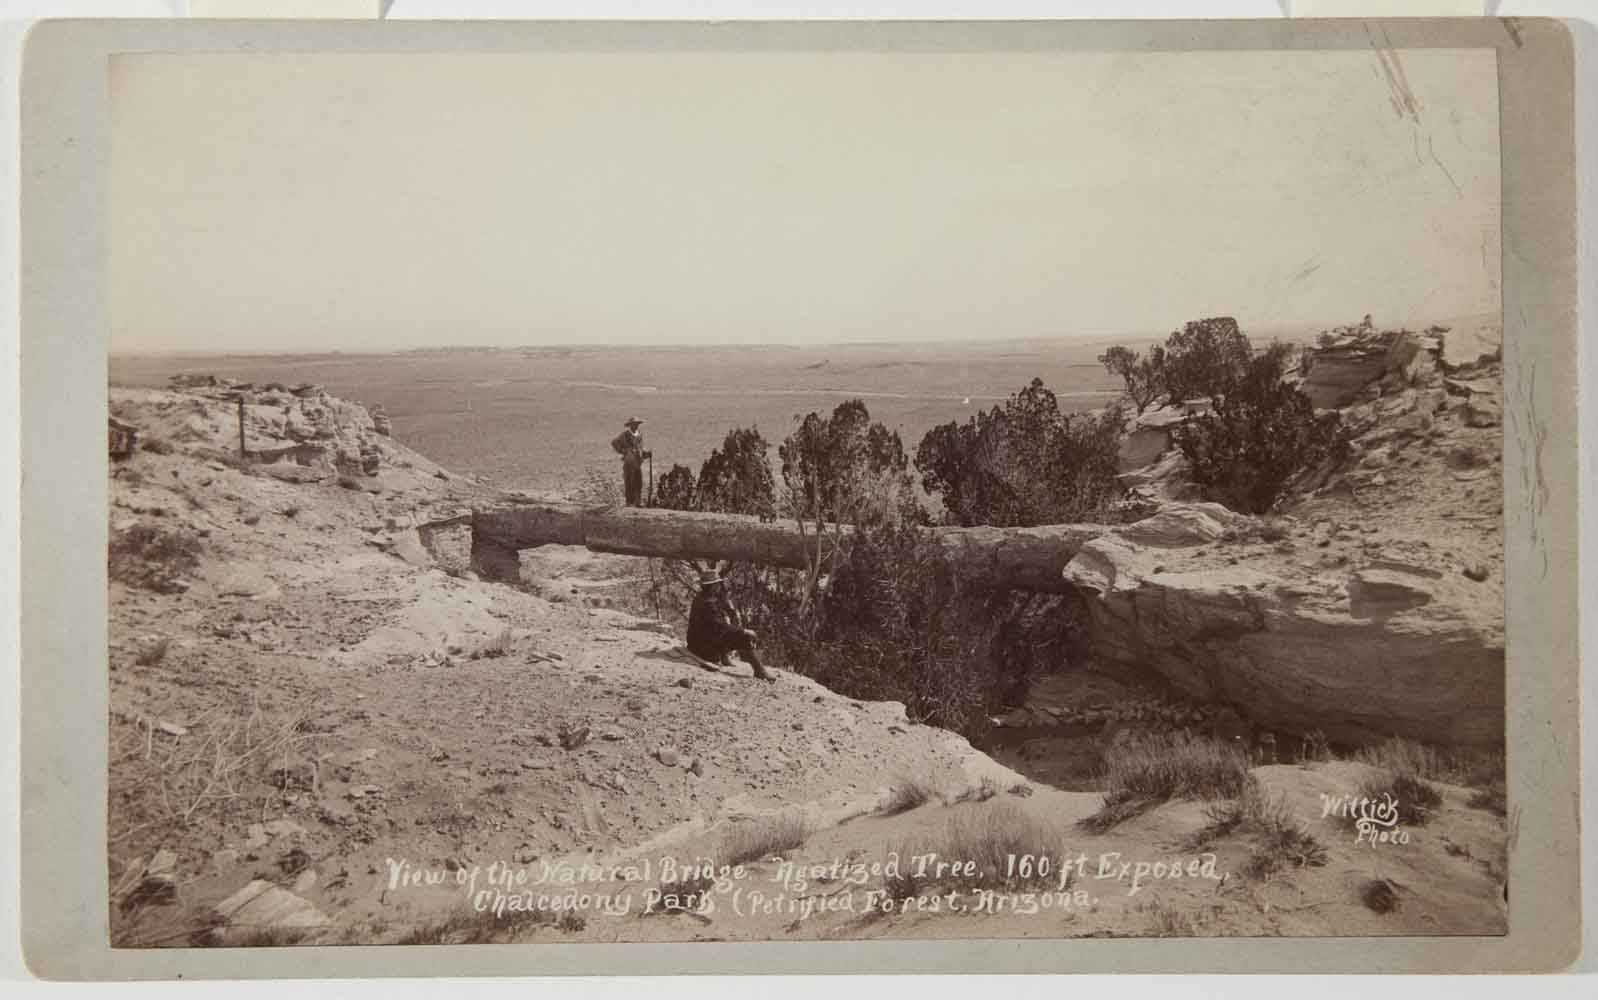 Ben Wittick (1845-1903) - View of the Natural Bridge, Agatized Tree, 160 ft Exposed, Chalcedony Park (Petrified Forest), Arizona